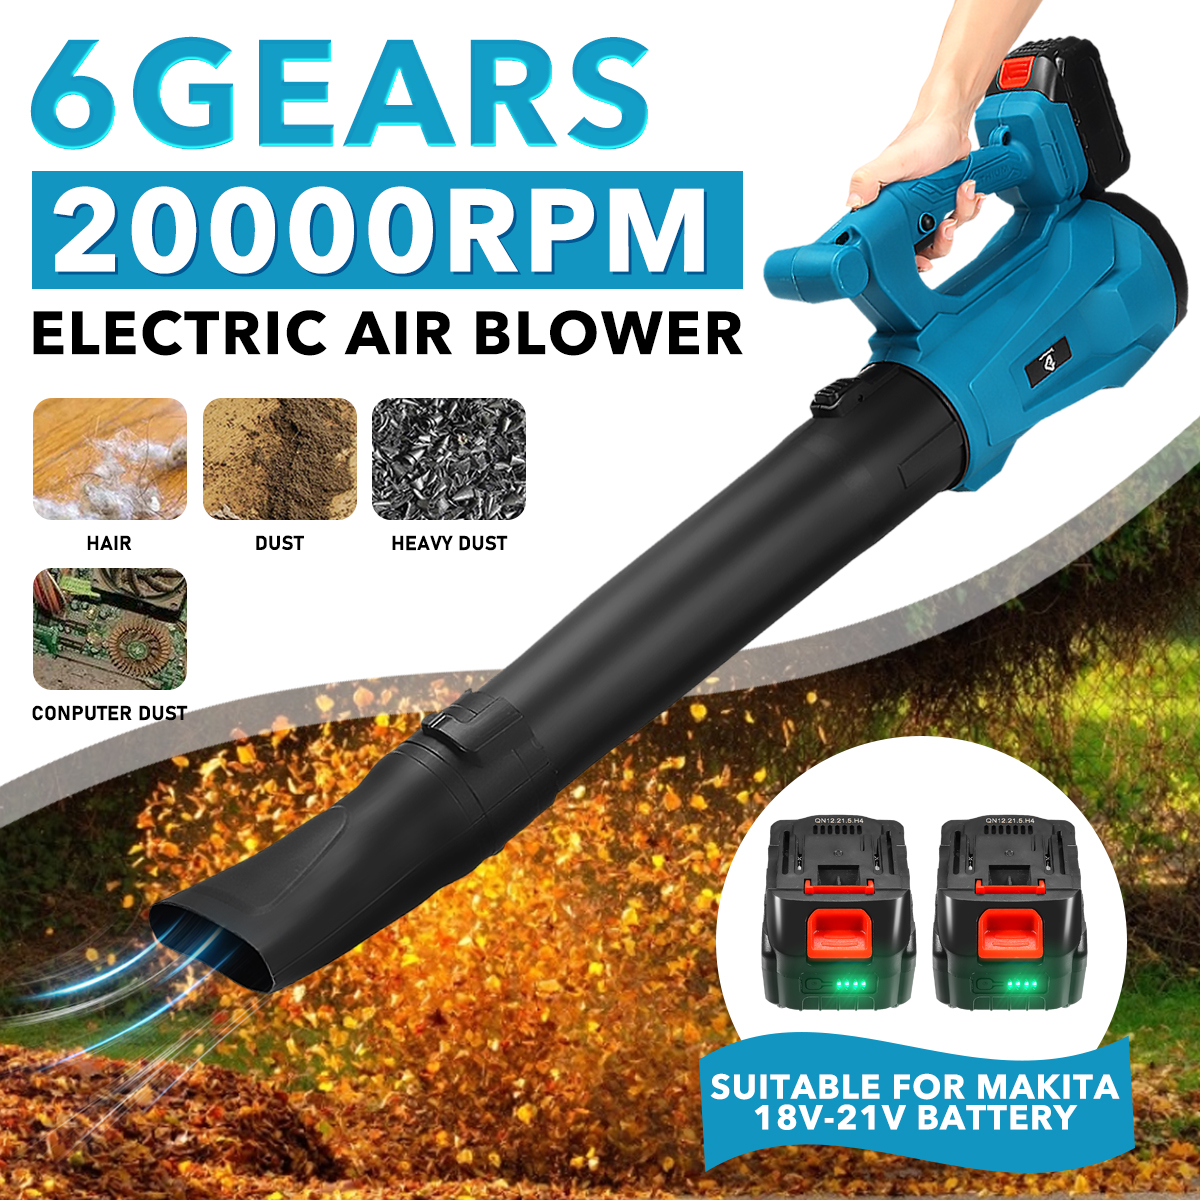 Doersupp-20000rpm-Cordless-Electric-Air-Blower-6-Speeds-Battery-Indicator-Vacuum-Cleannig-Blowing-Co-1868152-1